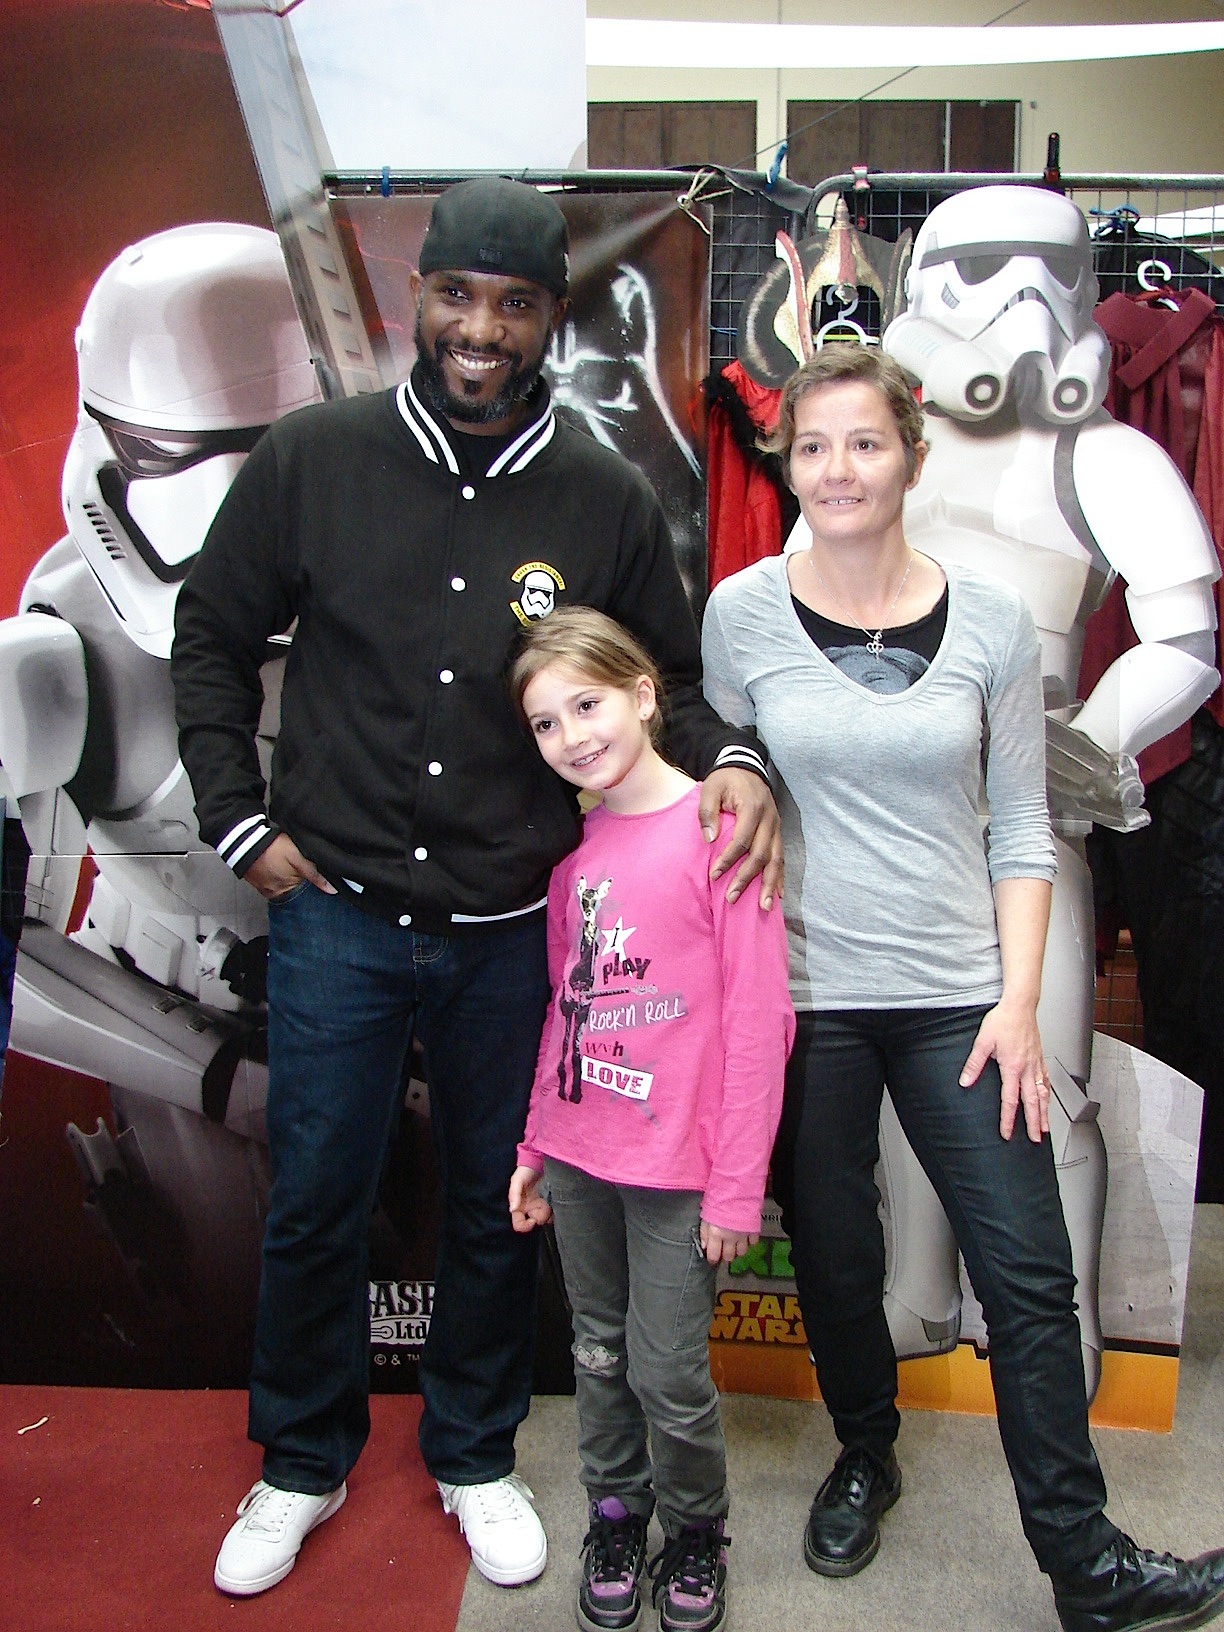 Stormtrooper Actor Phoenix James at ASFA Star Wars Convention in Amélie les Bains in South of France - Photo by Virginie Maurille 36